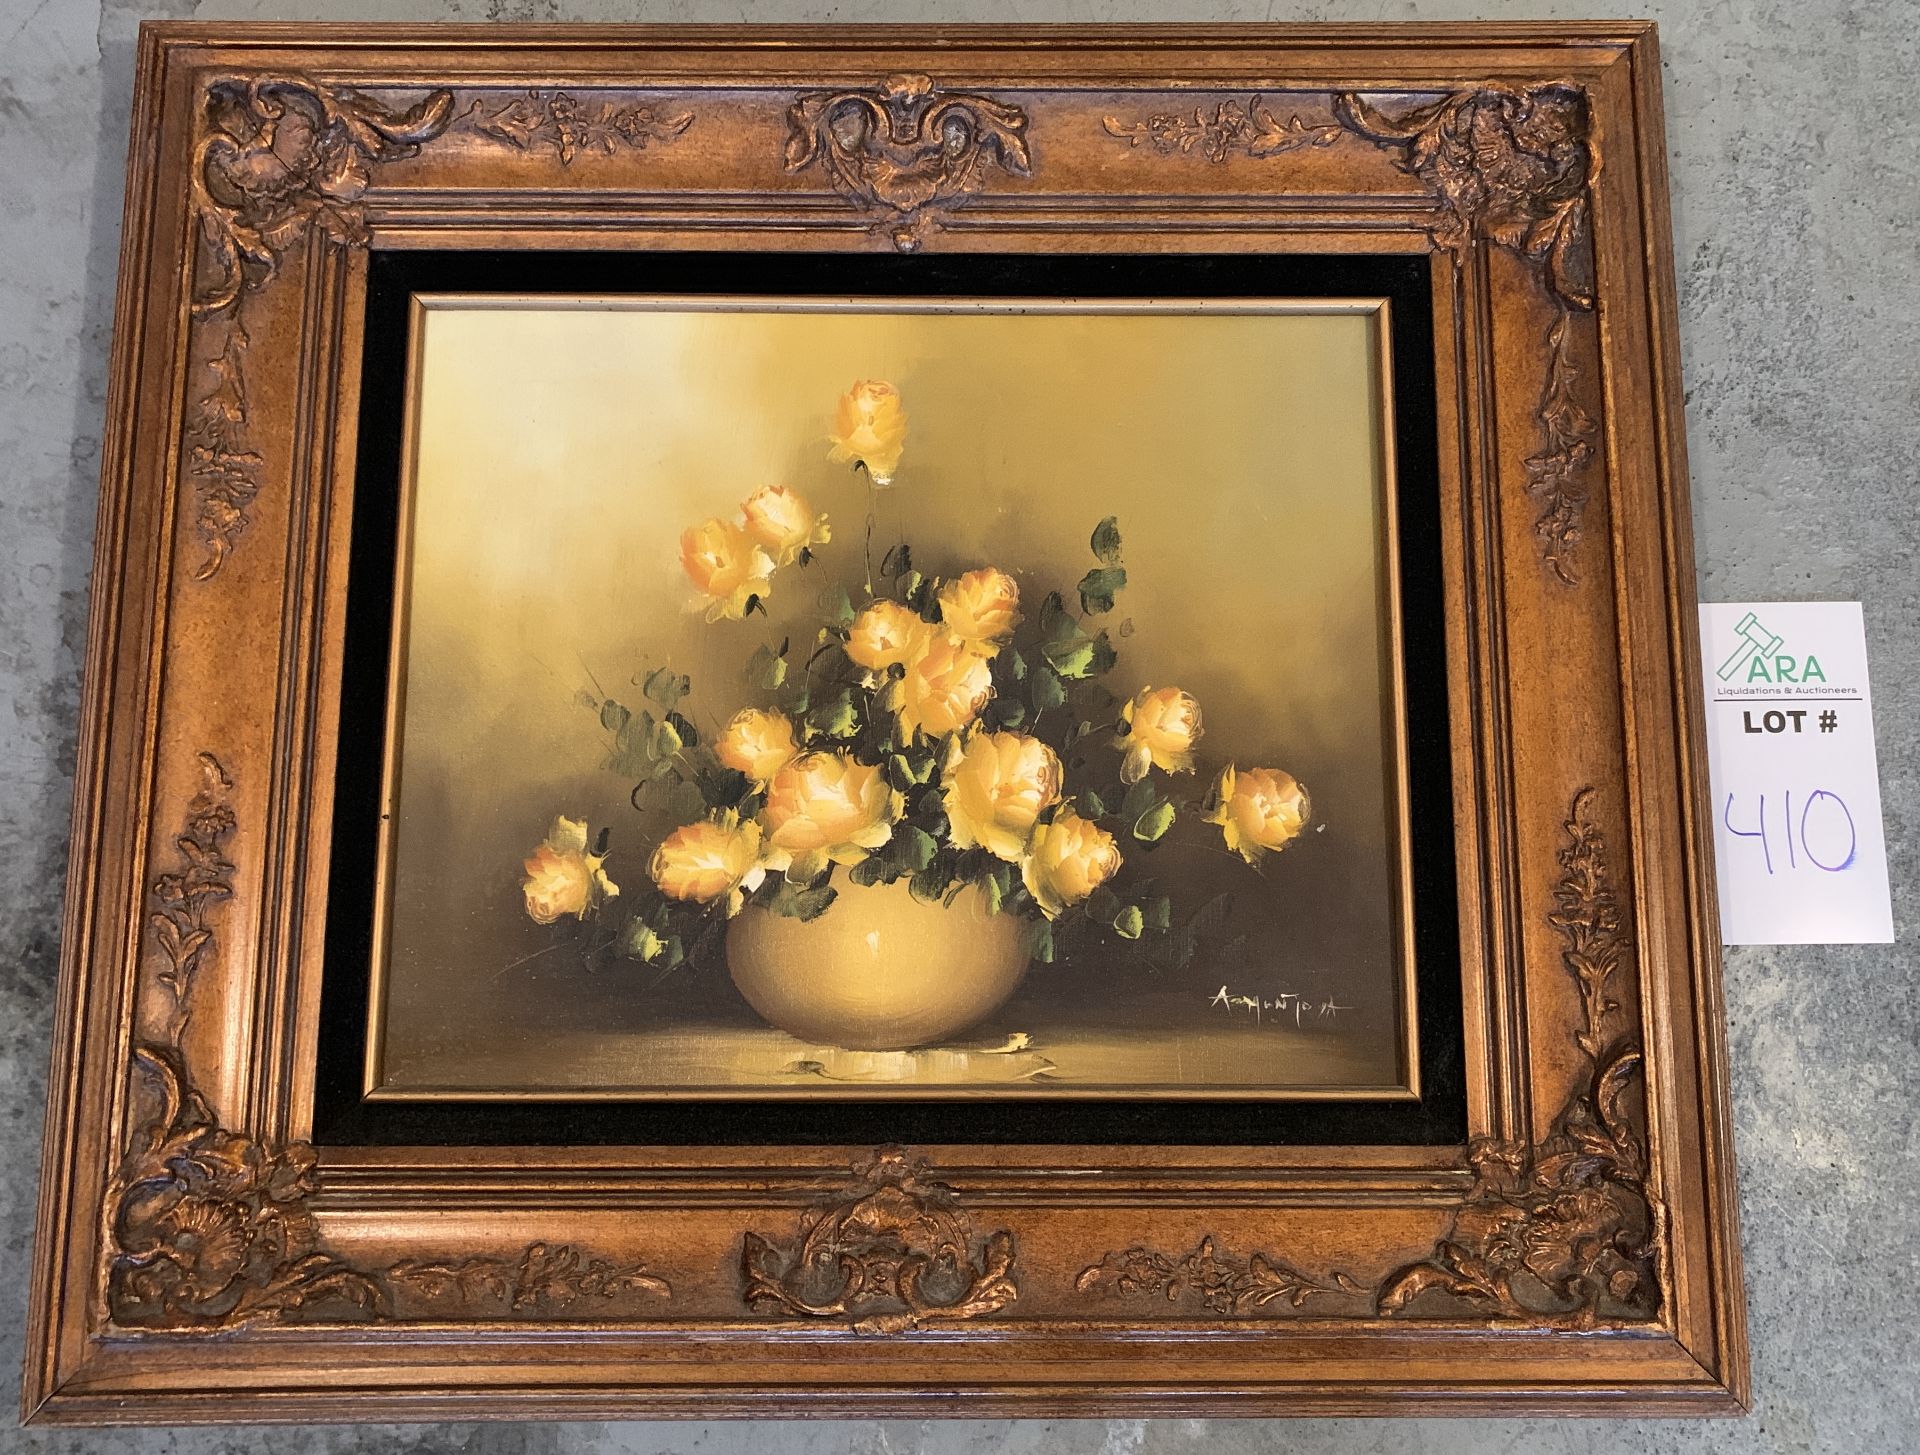 THICK FRAMED FLORAL ART PIECE, YELLOW FLOWERS IN VASE. DIMENSIONS: 28X31.5"